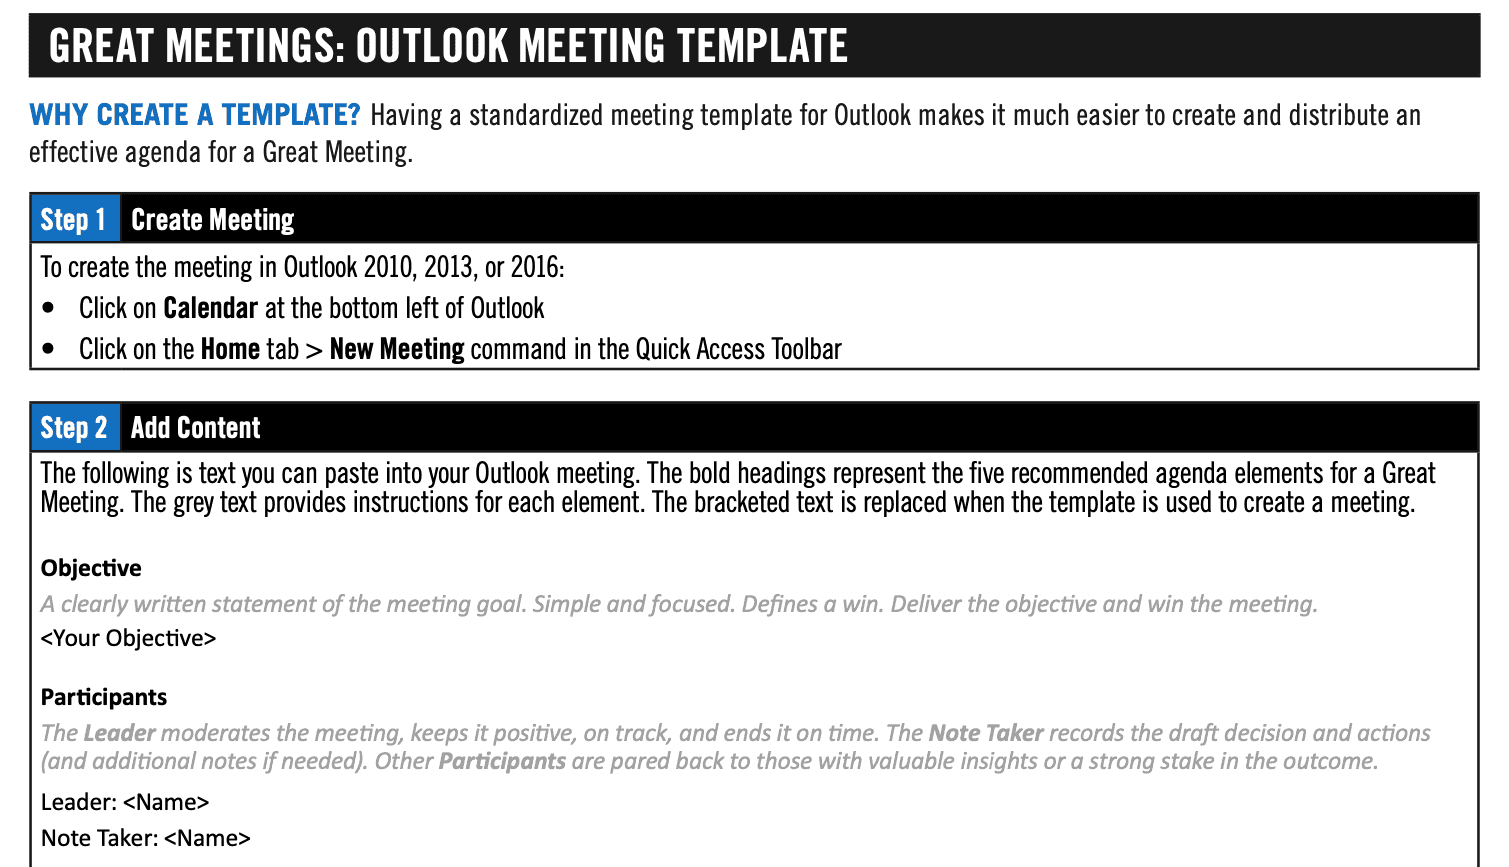 Template filled out with information about how to conduct a great meeting.